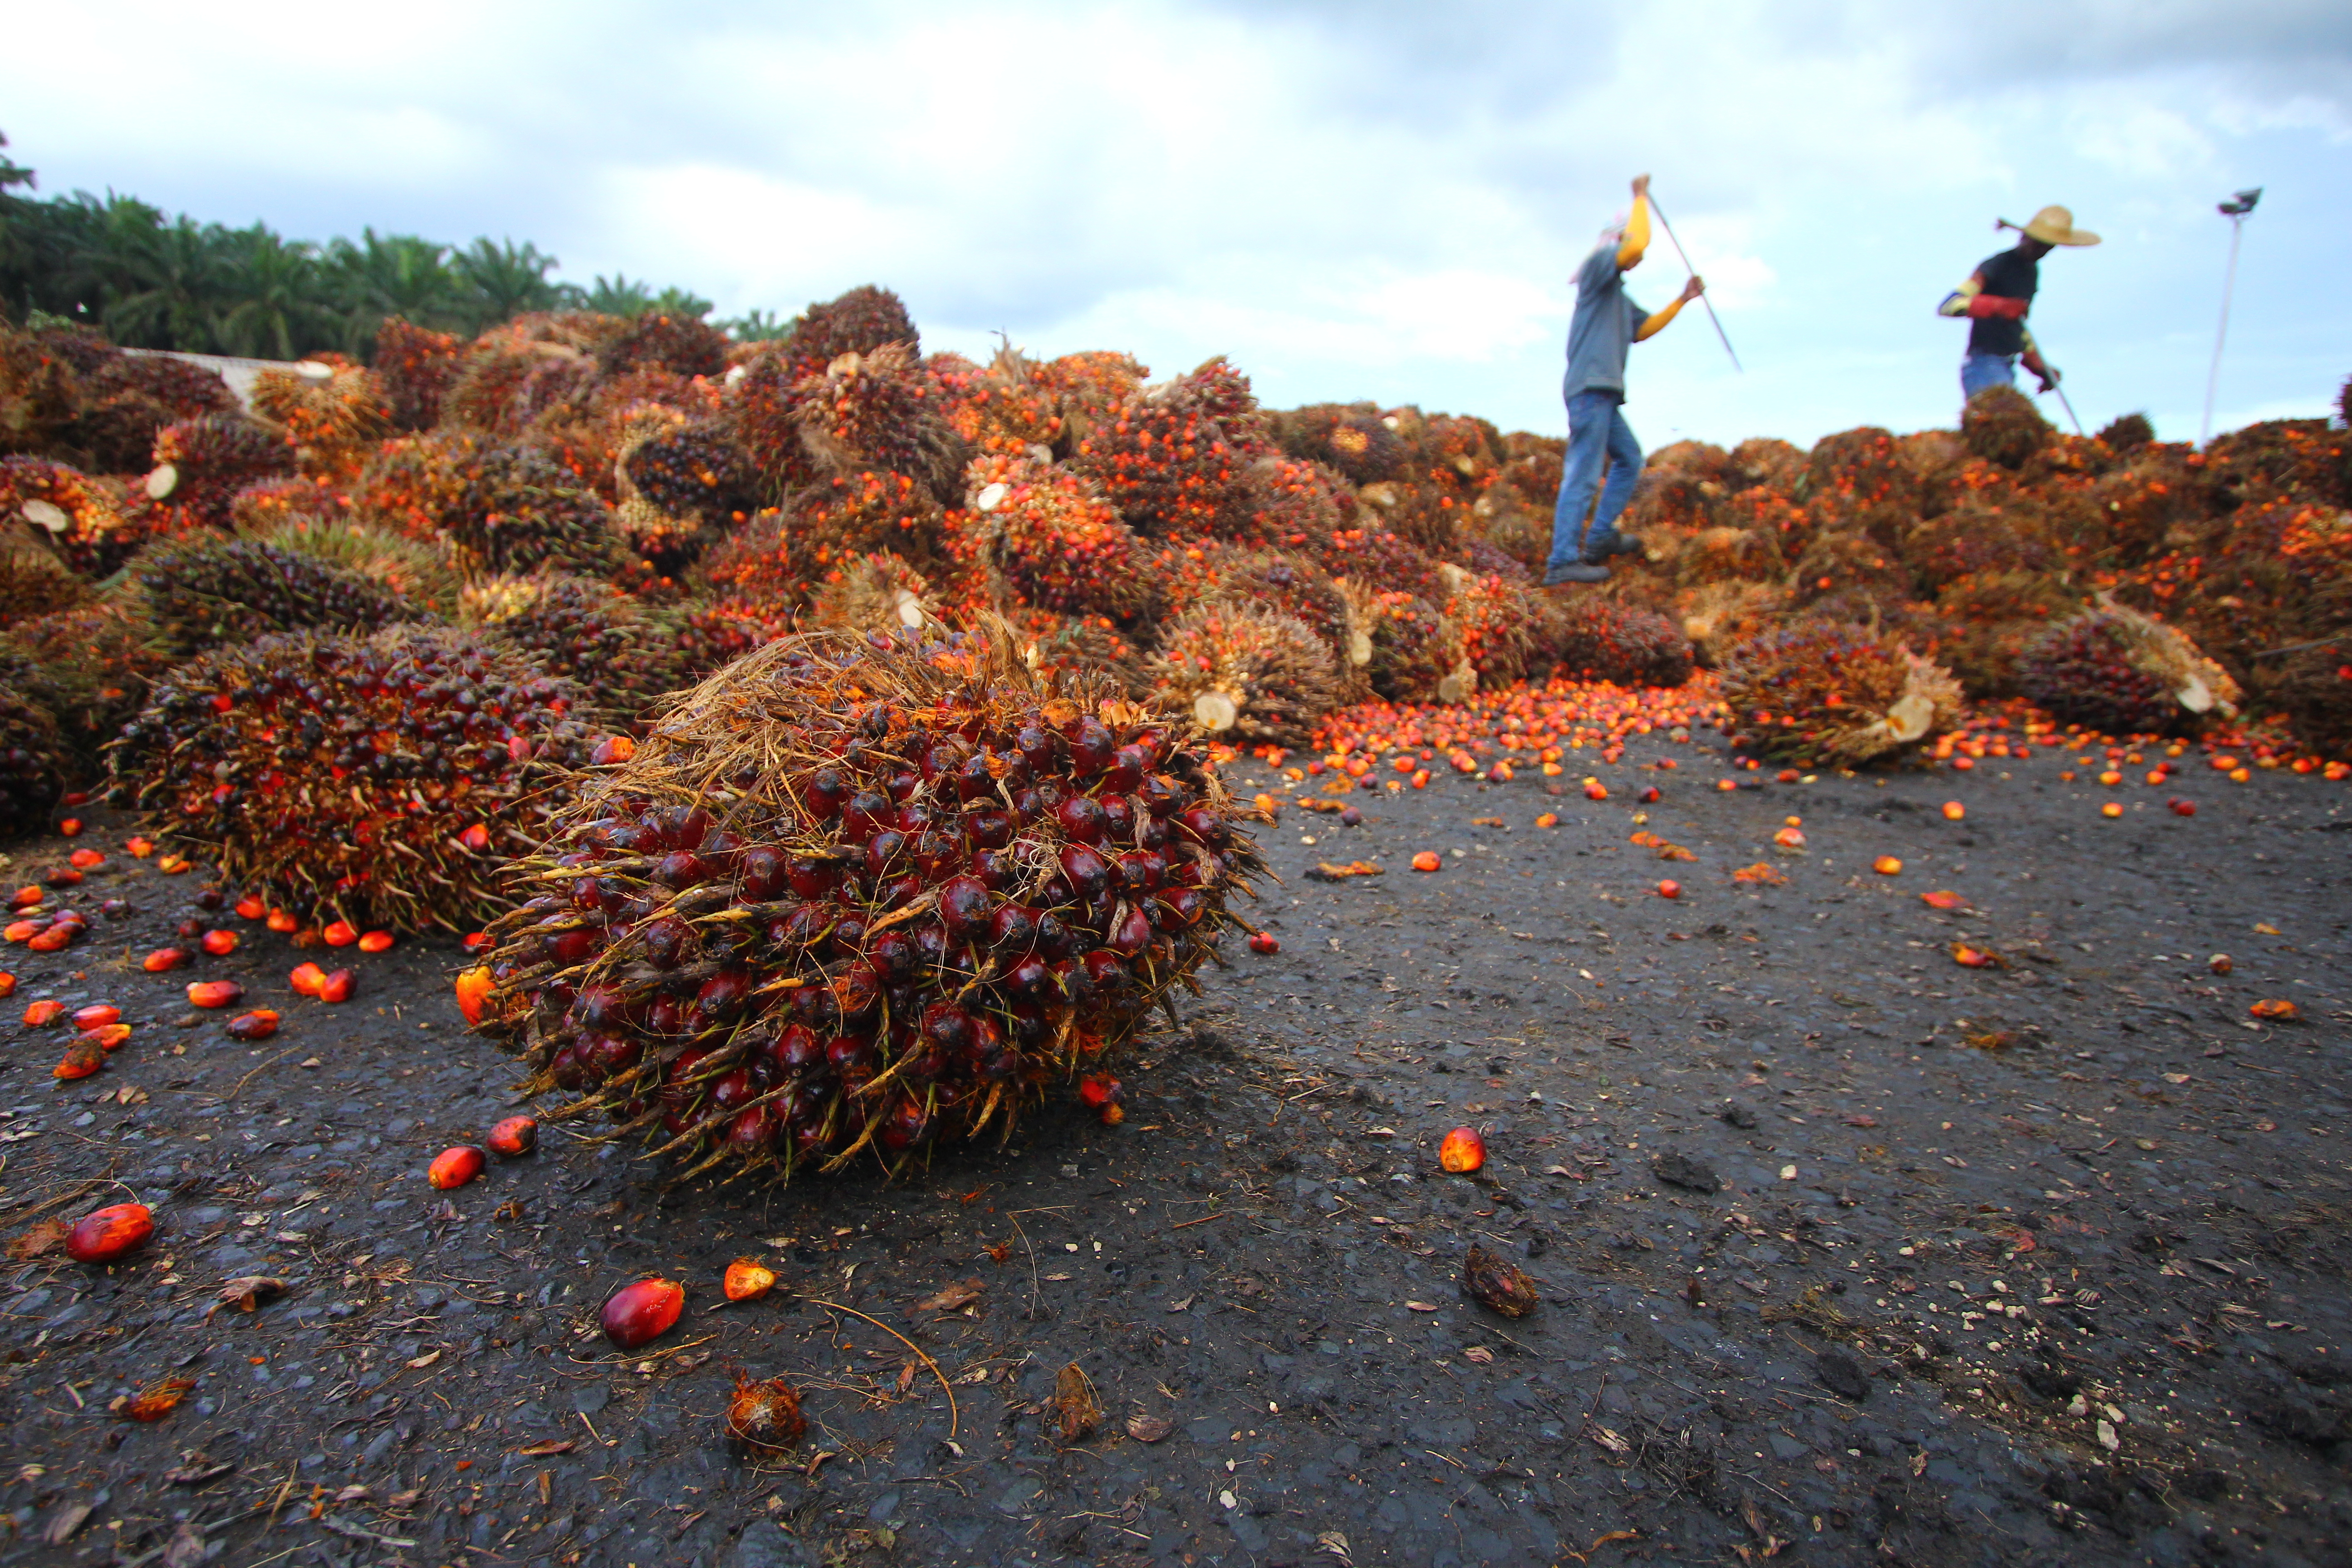 A bushel of oil palm fruit sits on the foreground, piles of other bushels behind it as two laborers work through them in the background.